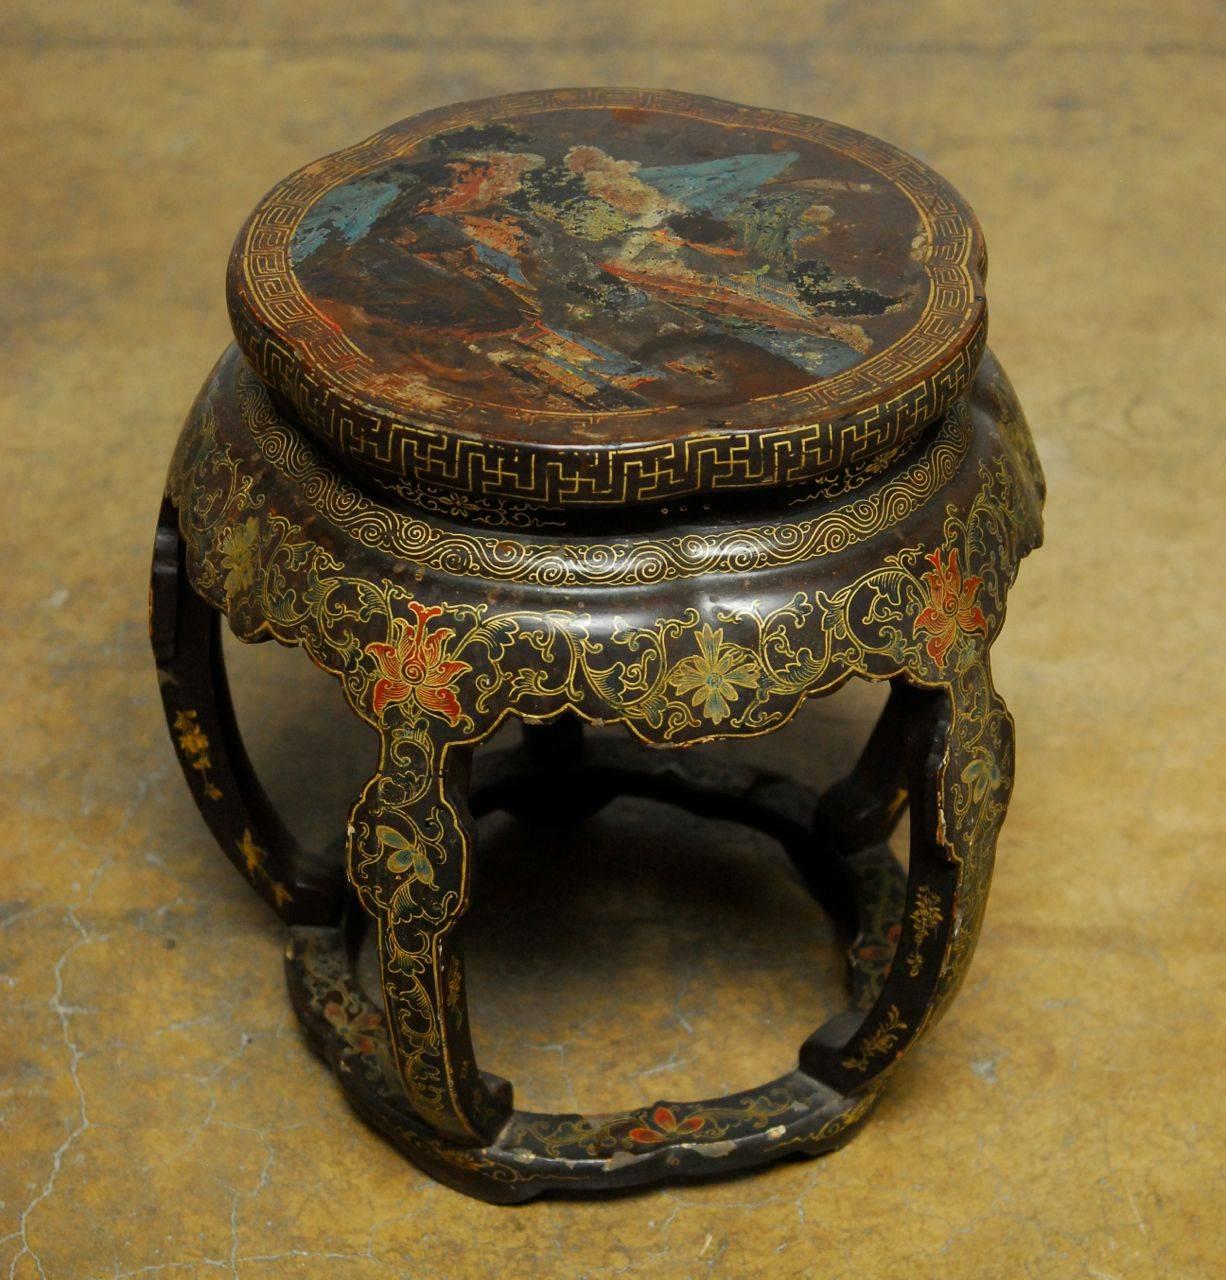 Chinese carved garden seat featuring a black lacquer finish with gilt decoration of flowers, Greek keys, and mountain scene on the top. Five leg design with a pedestal form and a lovely vintage patina. Would make a great cocktail or side table.